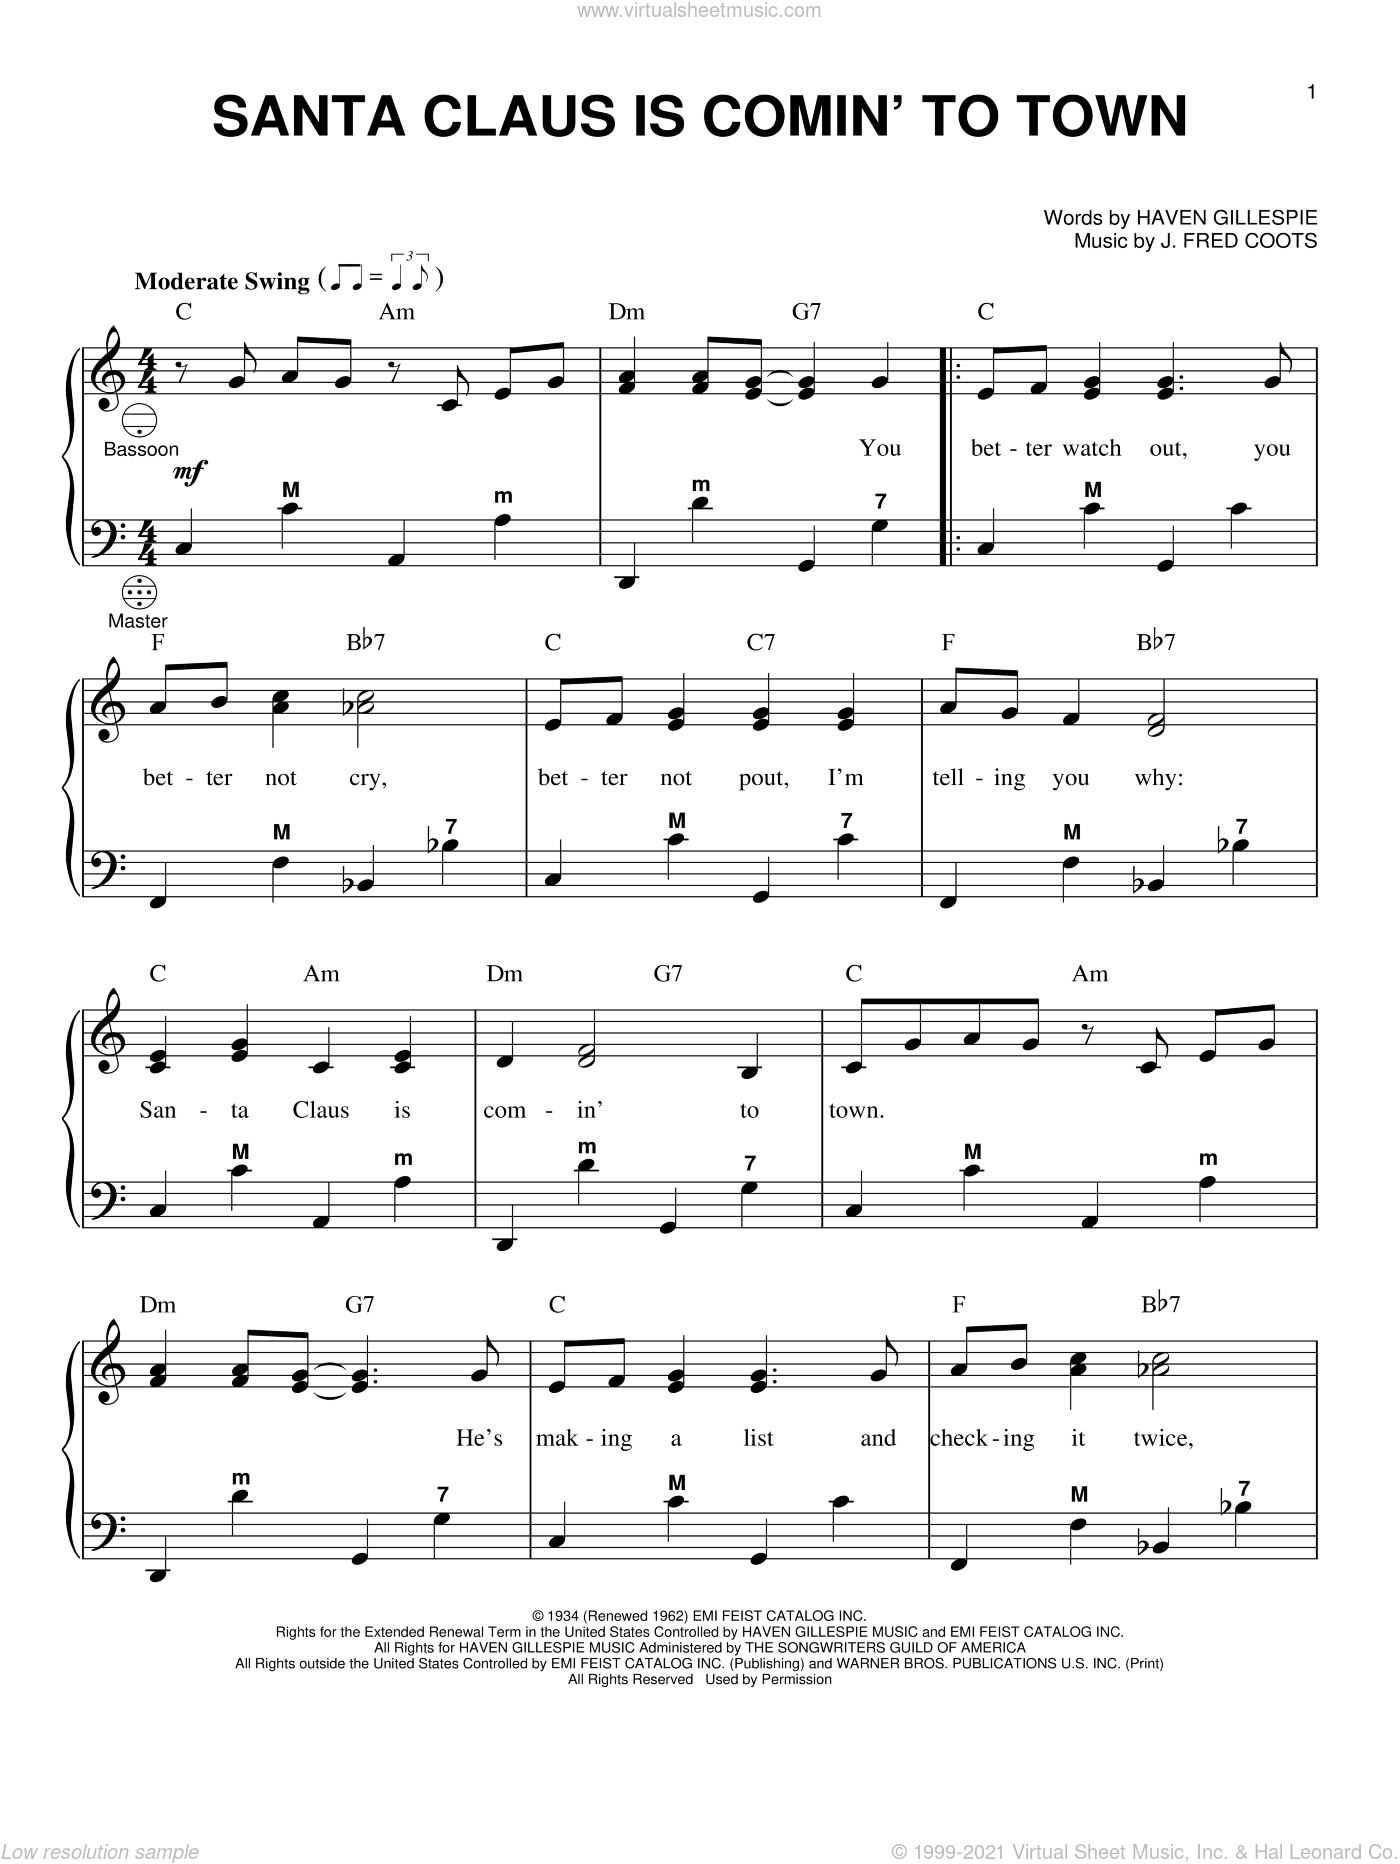 Coots - Santa Claus Is Comin' To Town sheet music for accordion